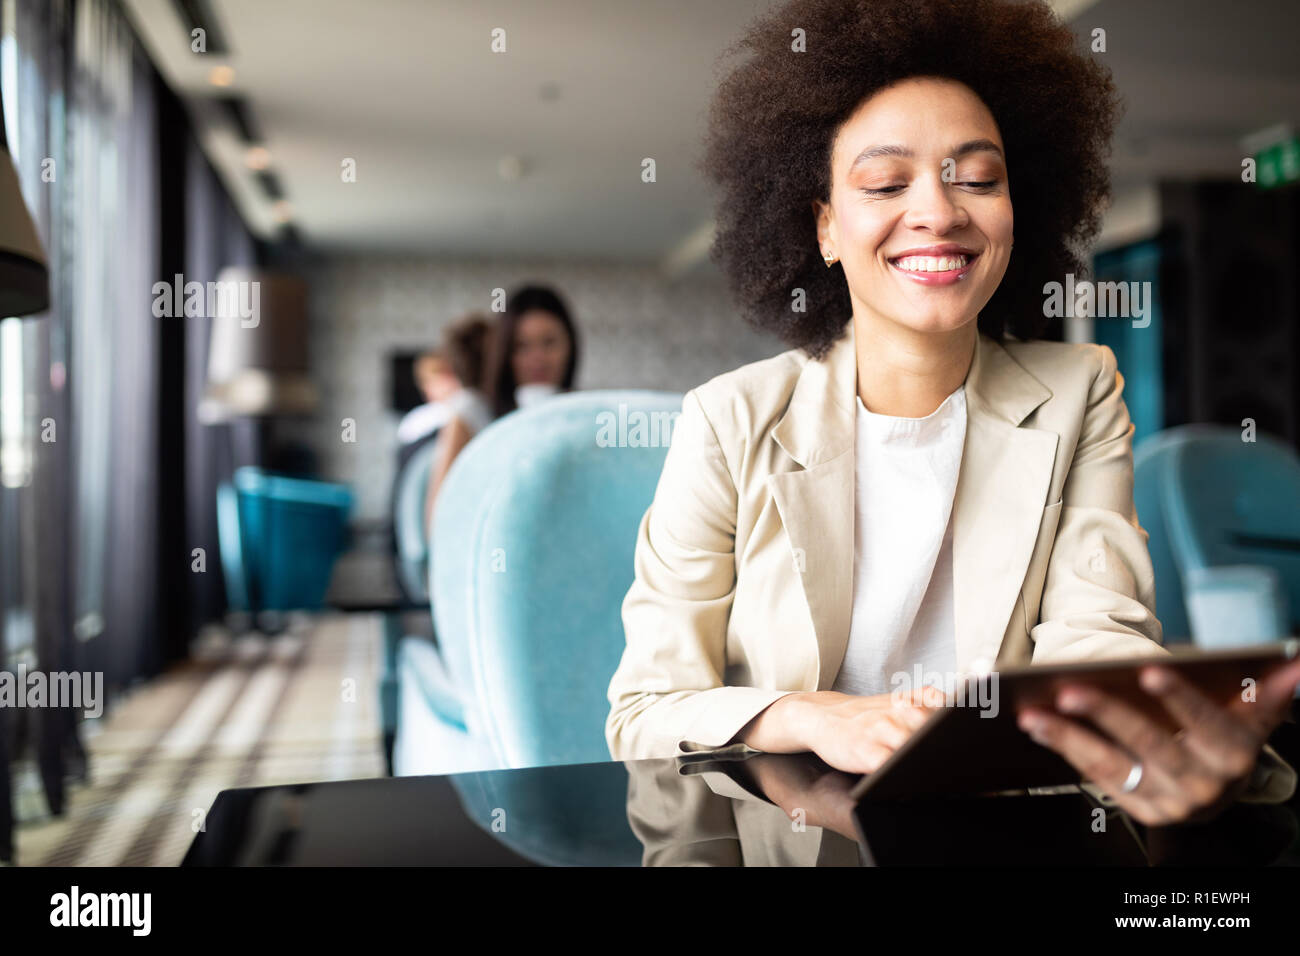 Happy black woman using tablet computer in coffee shop Banque D'Images